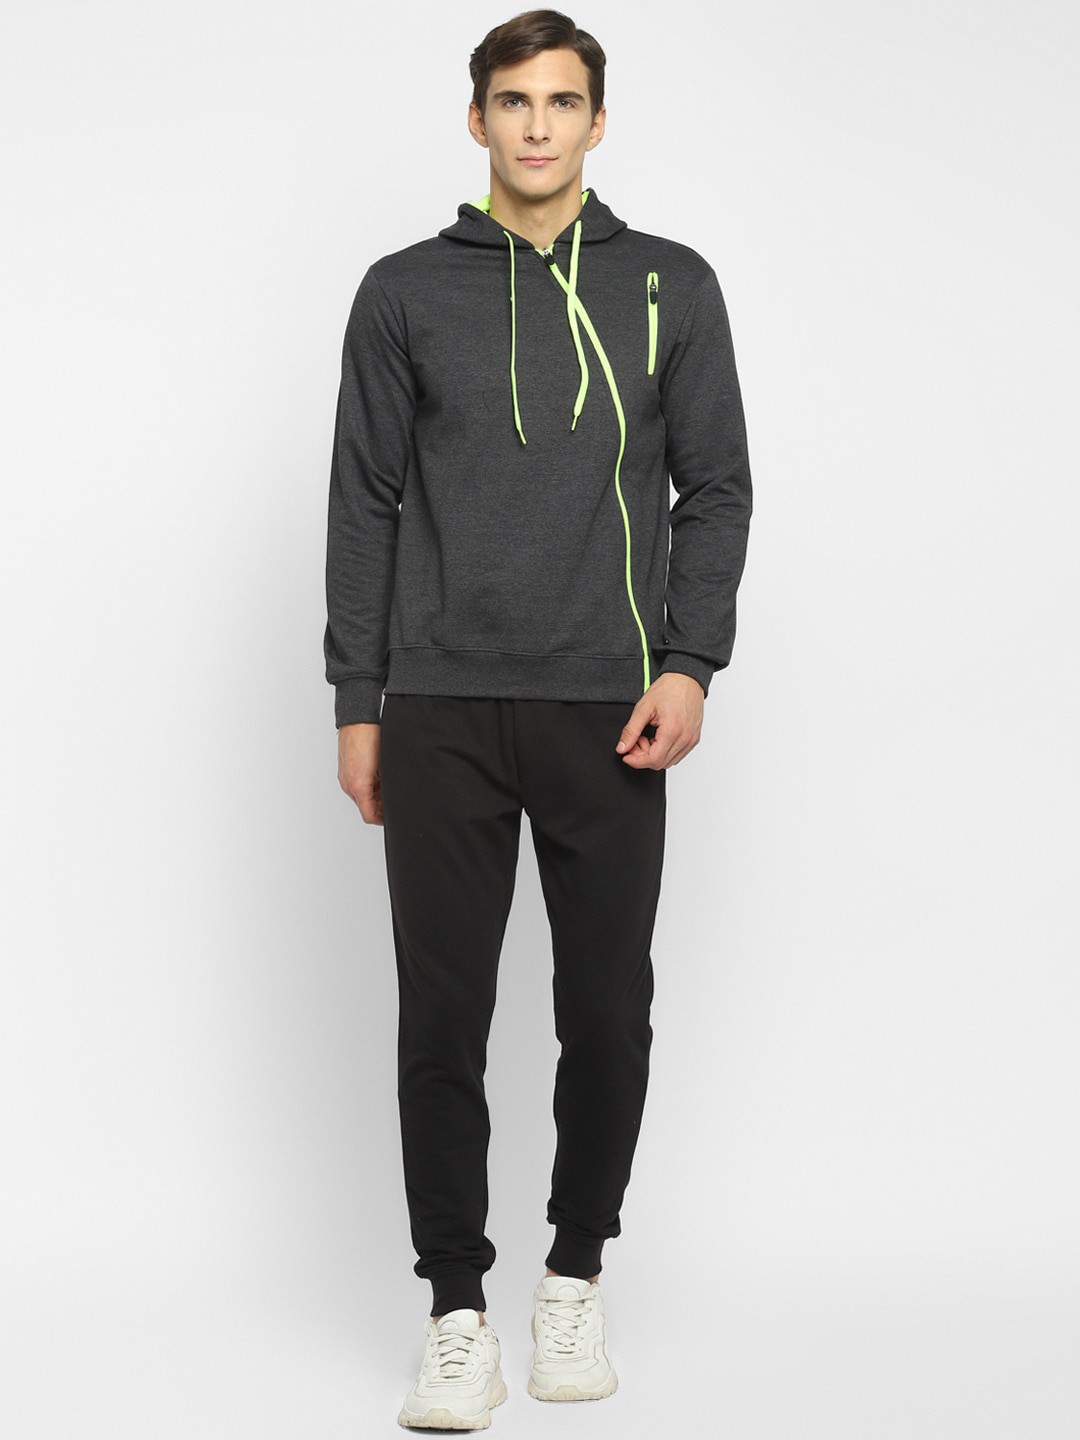 Clothing Tracksuits | OFF LIMITS Men Charcoal Grey & Black Solid Track Suit - QB11188